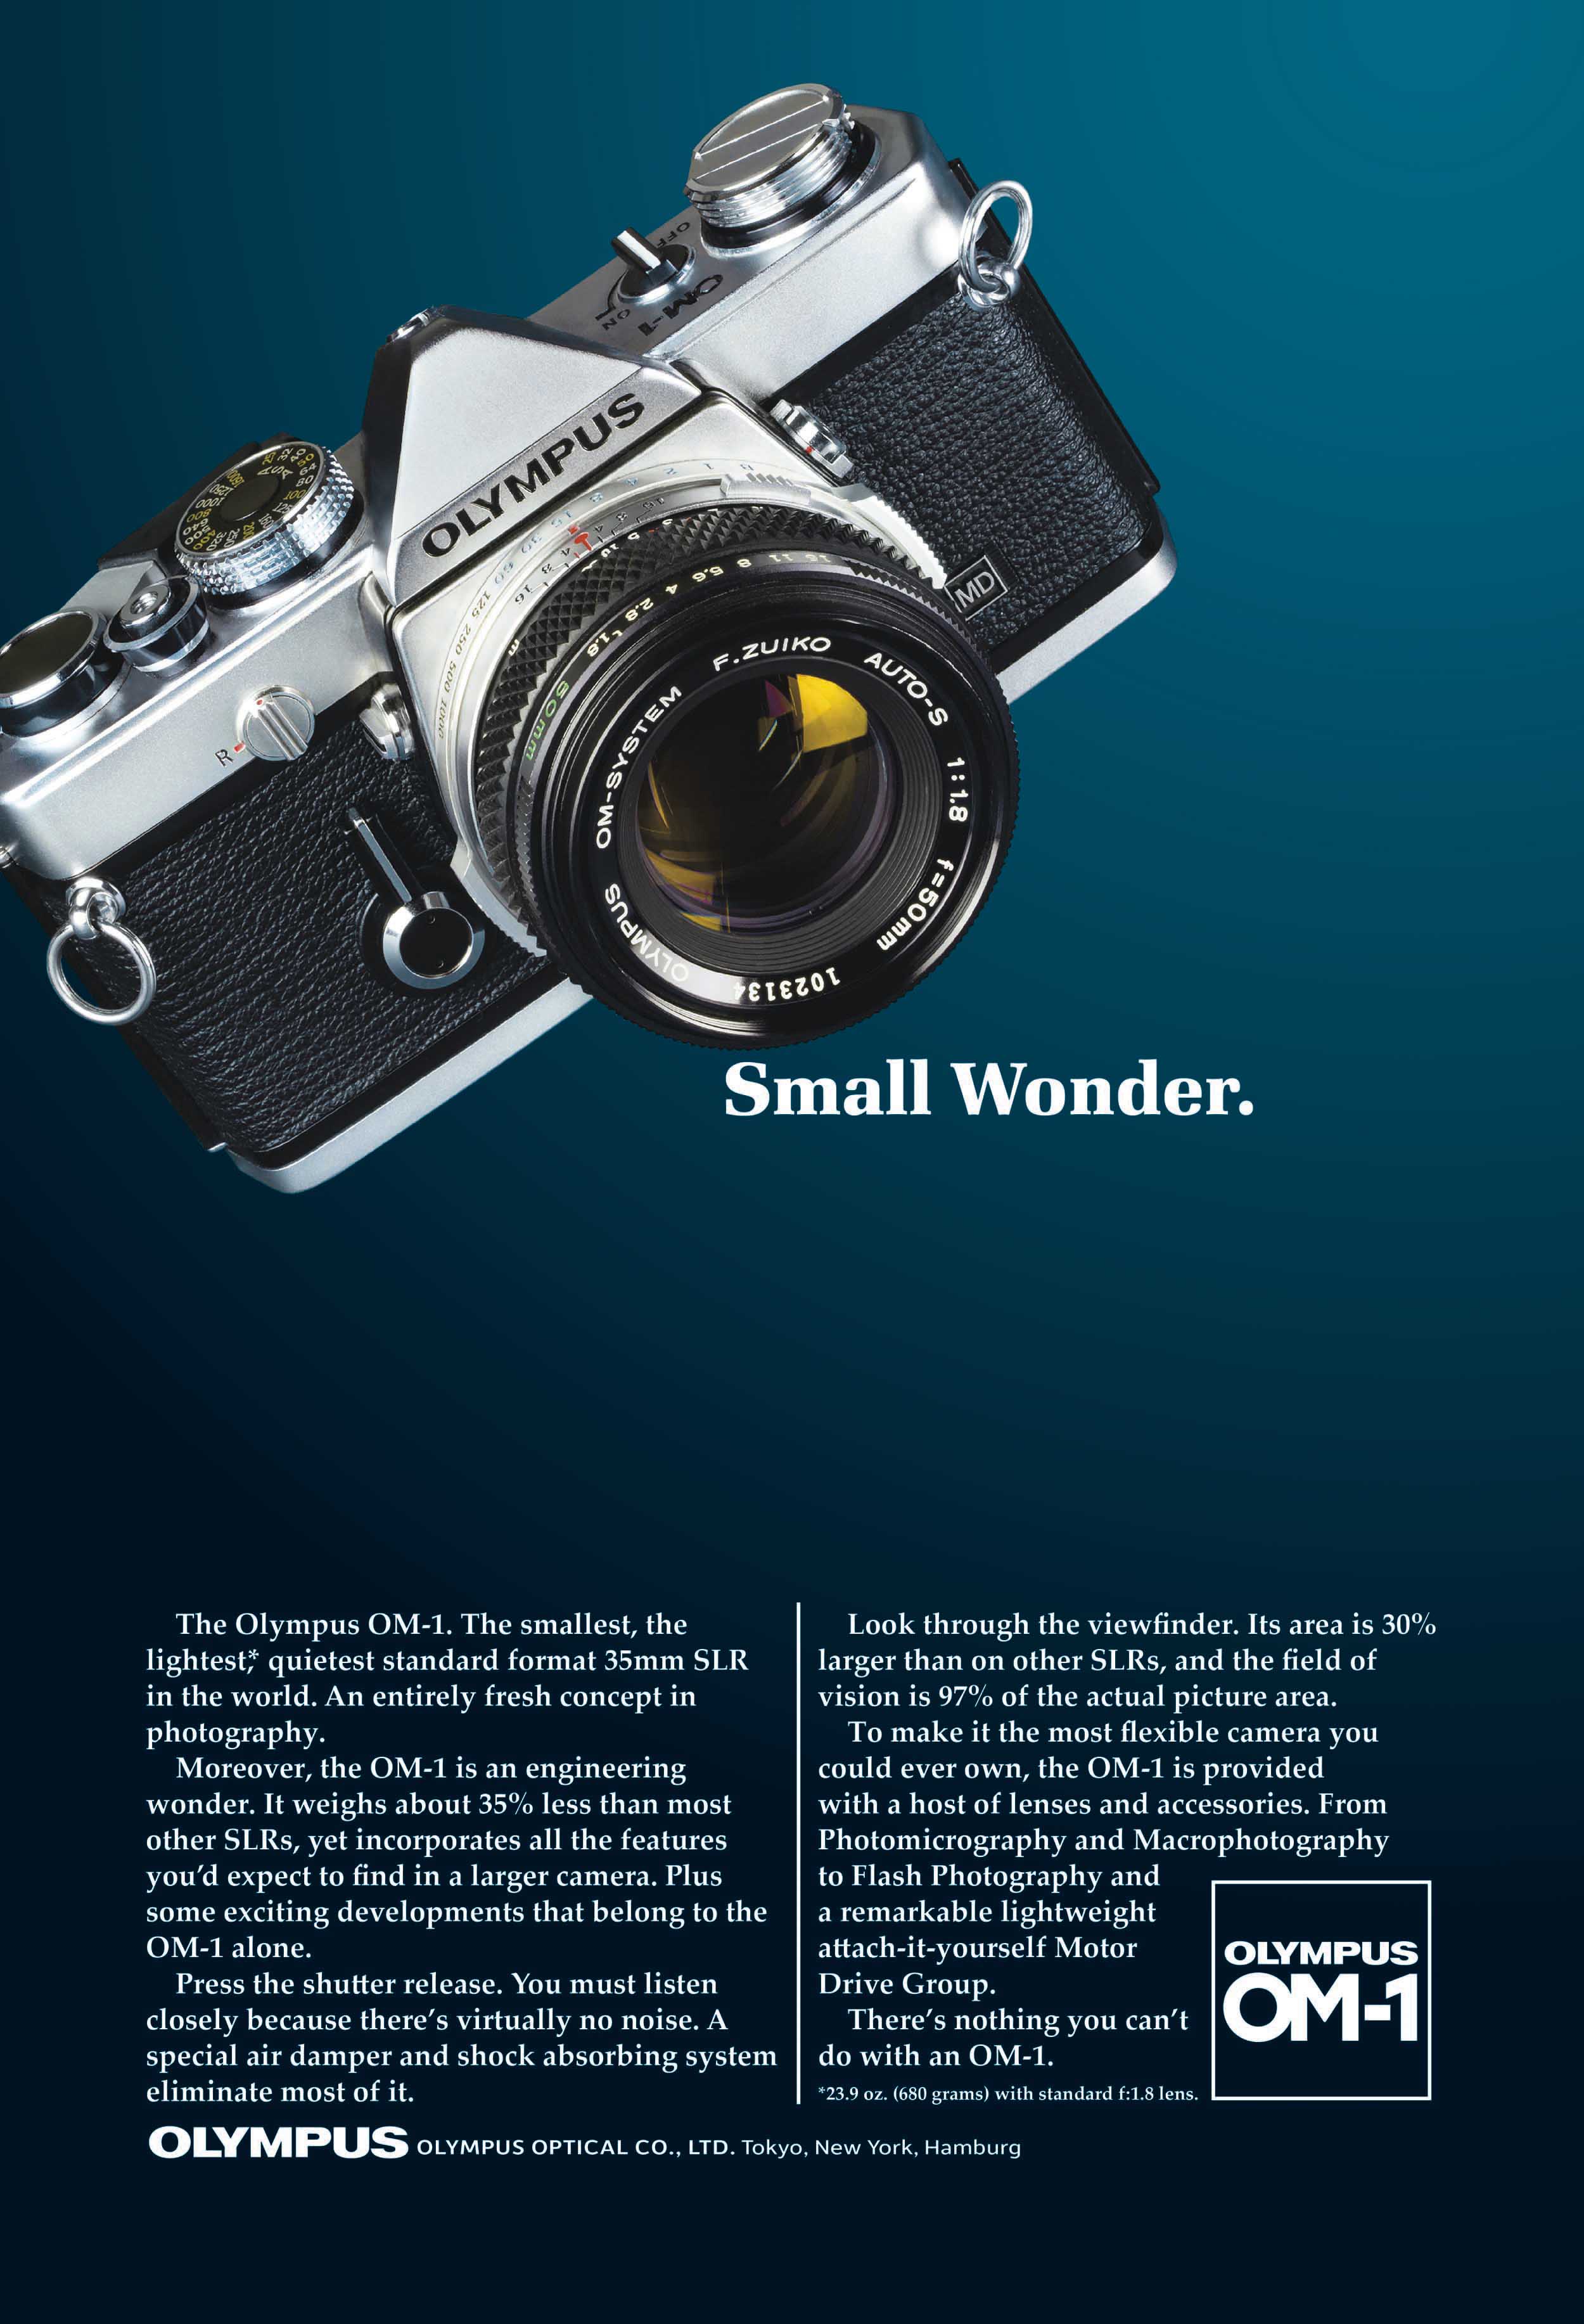 Advertisement showing the Olympus OM-1 film camera floating in front of a blue background.